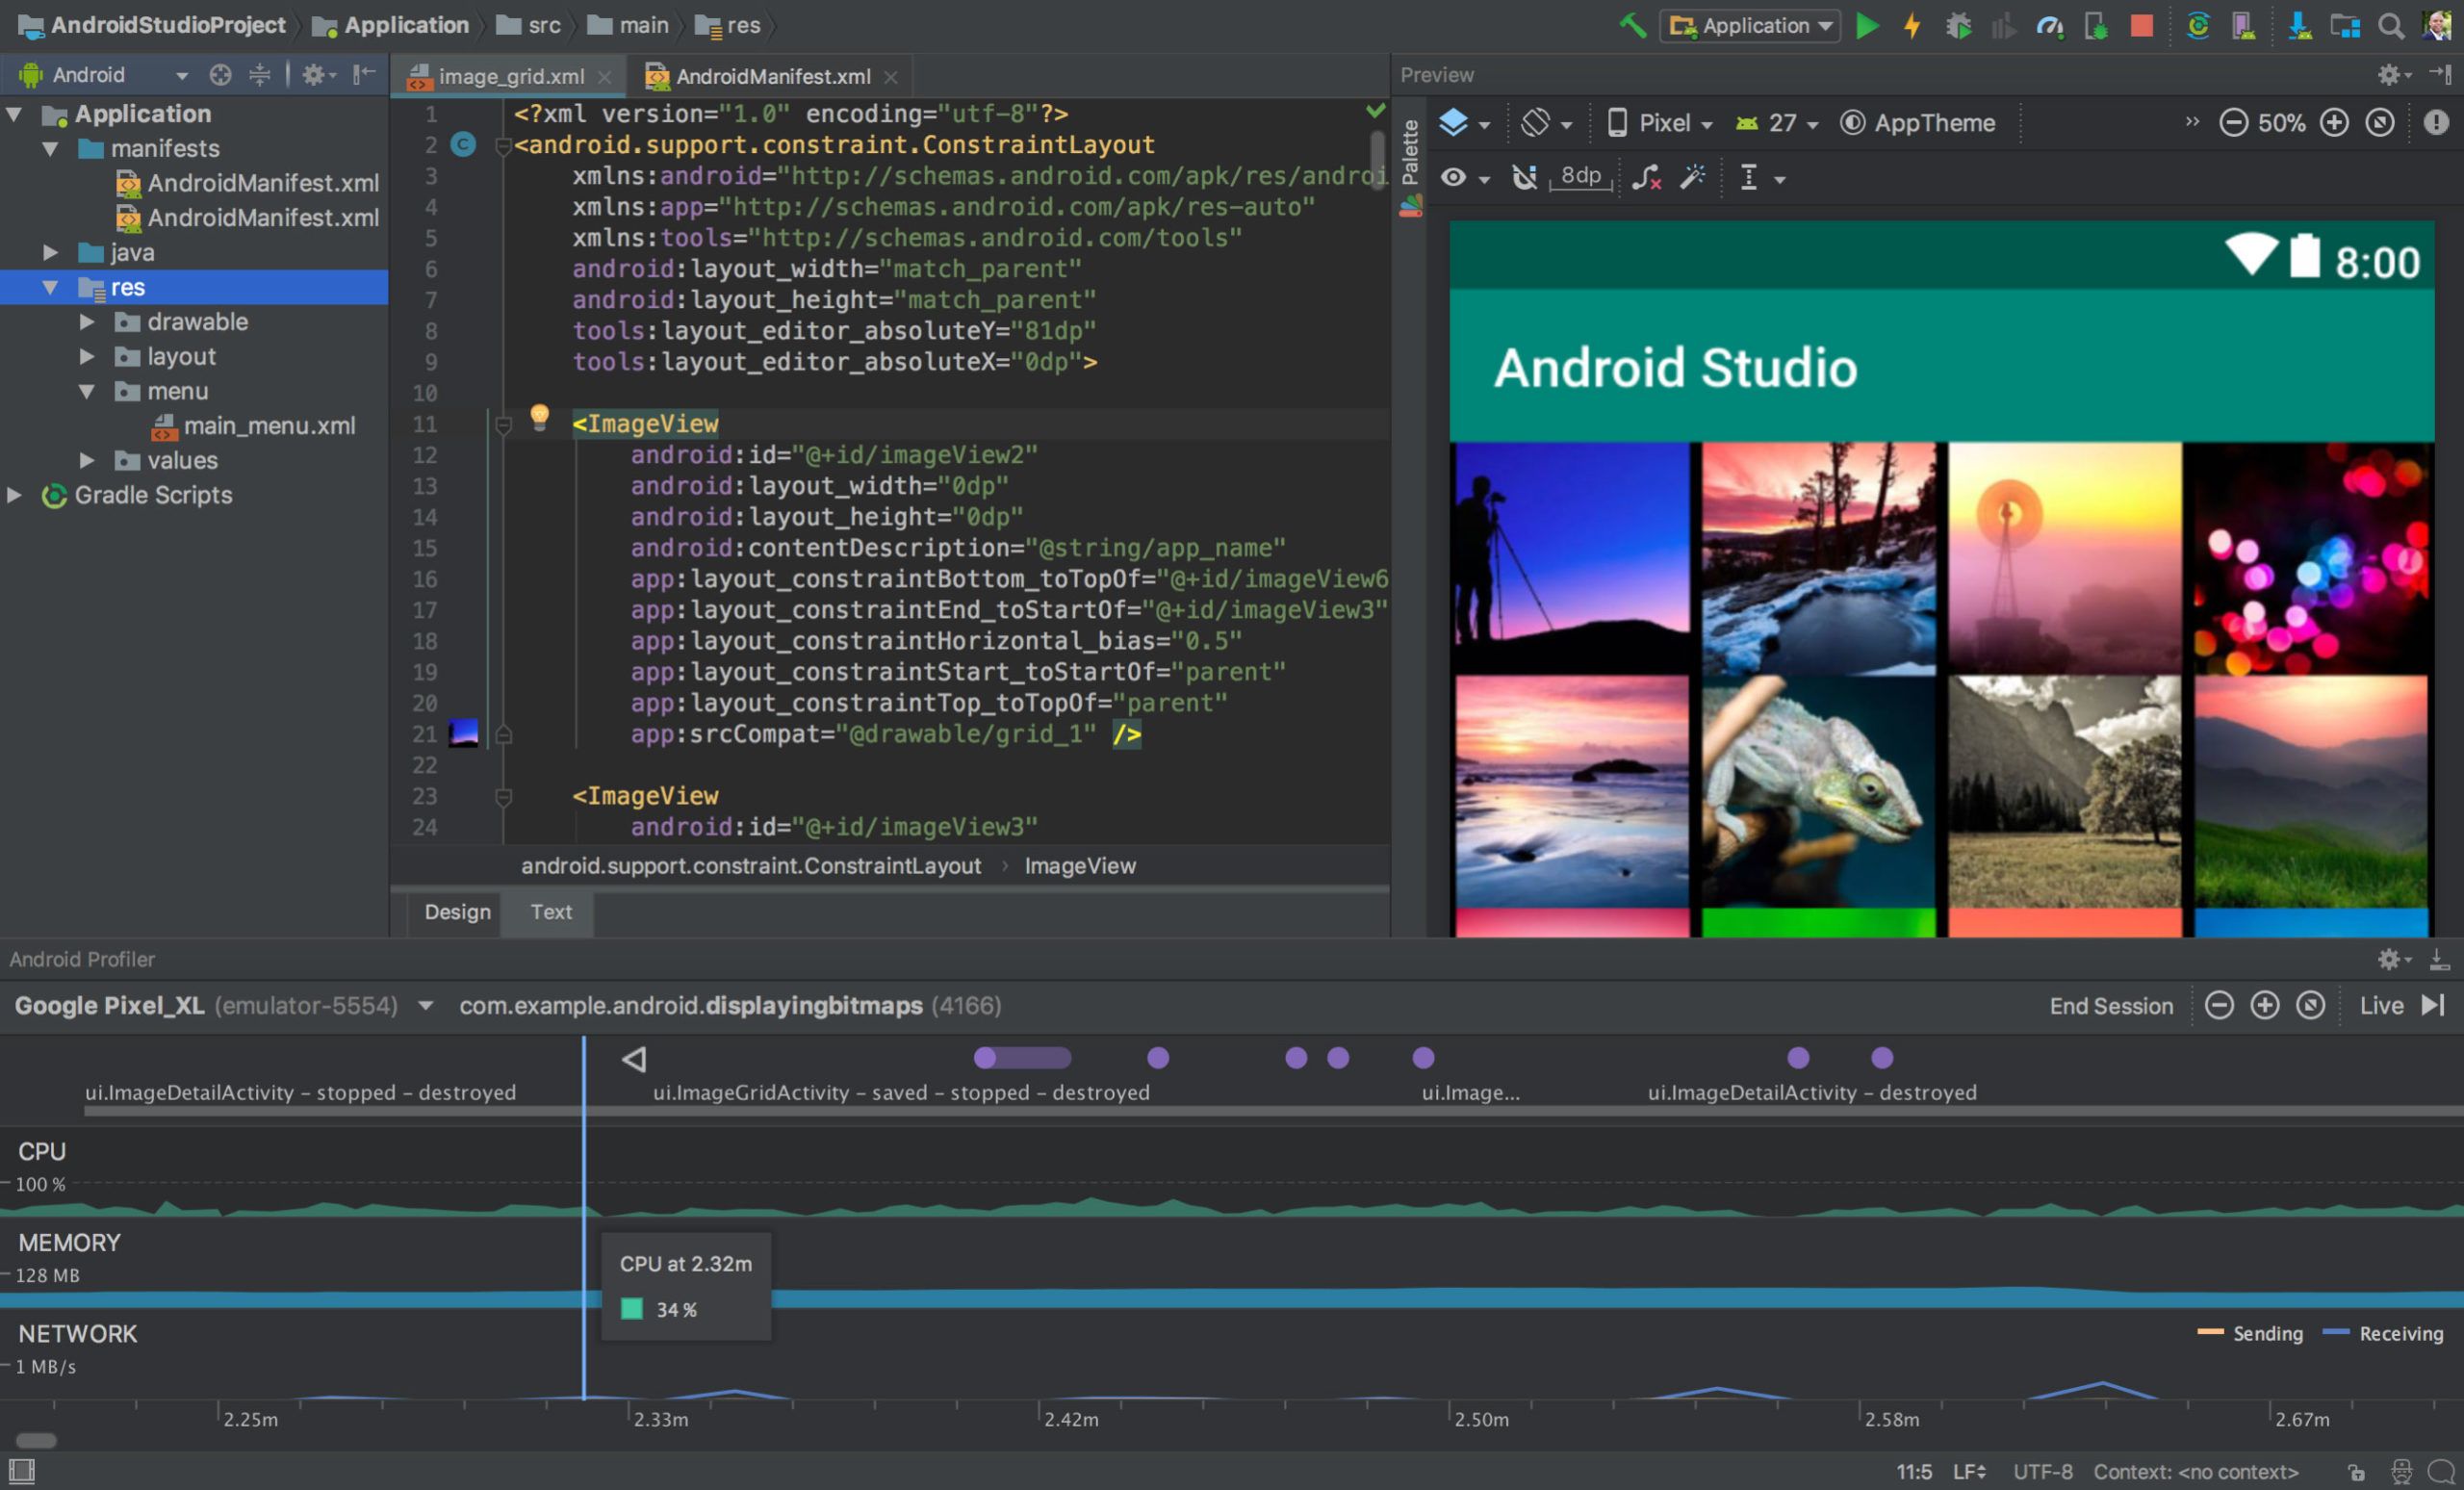 Screenshot of Android Studio with command line tool and app preview window opened